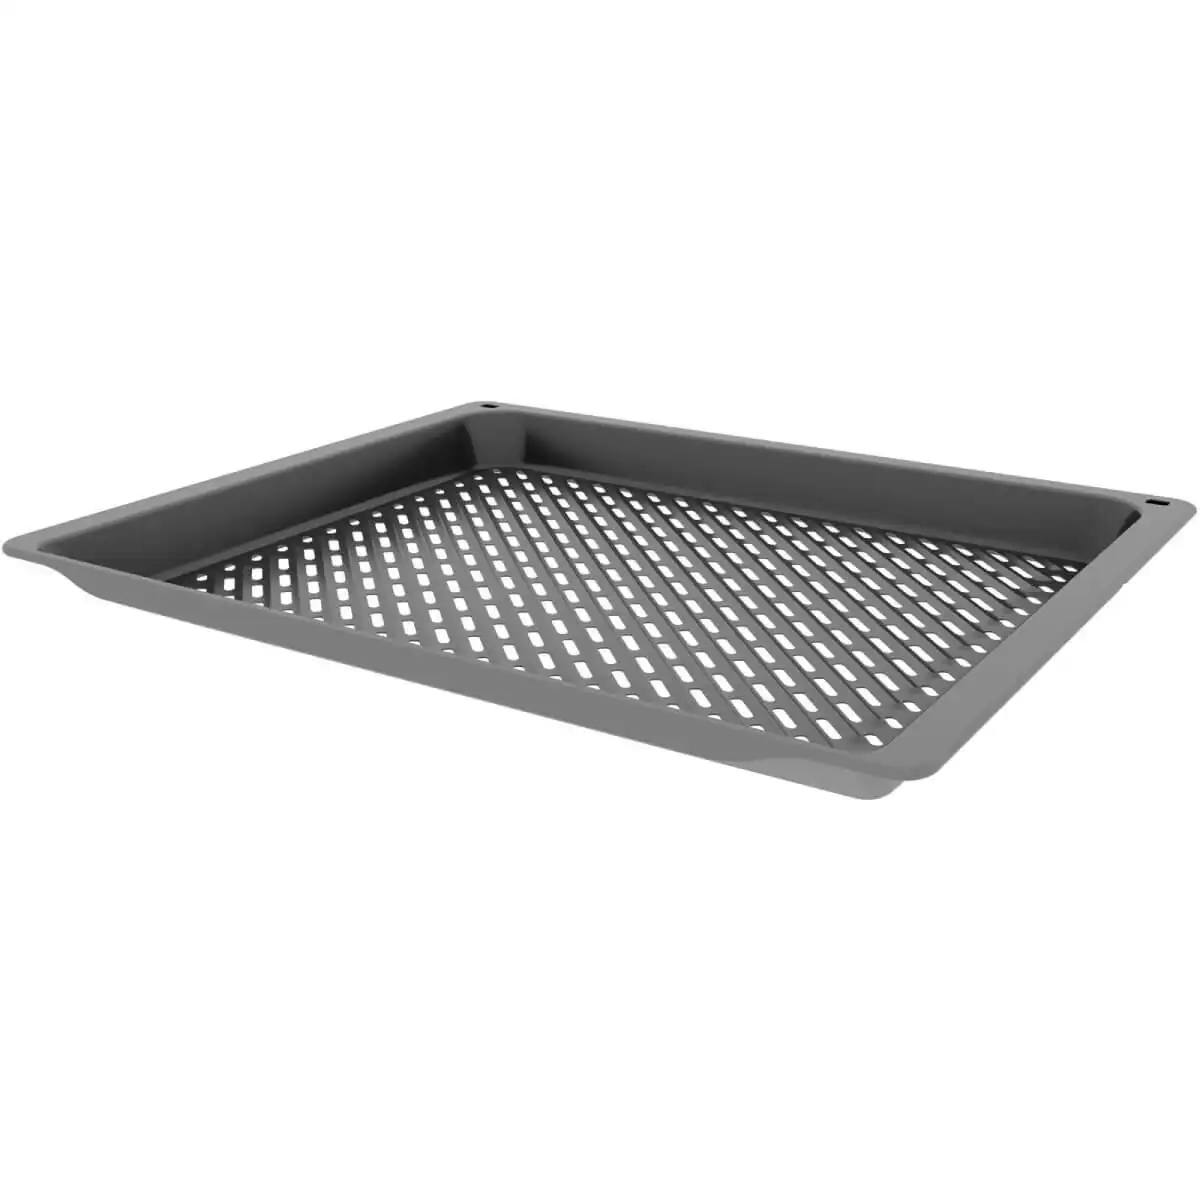 Bosch Air Fry & Grill Tray Anthracite